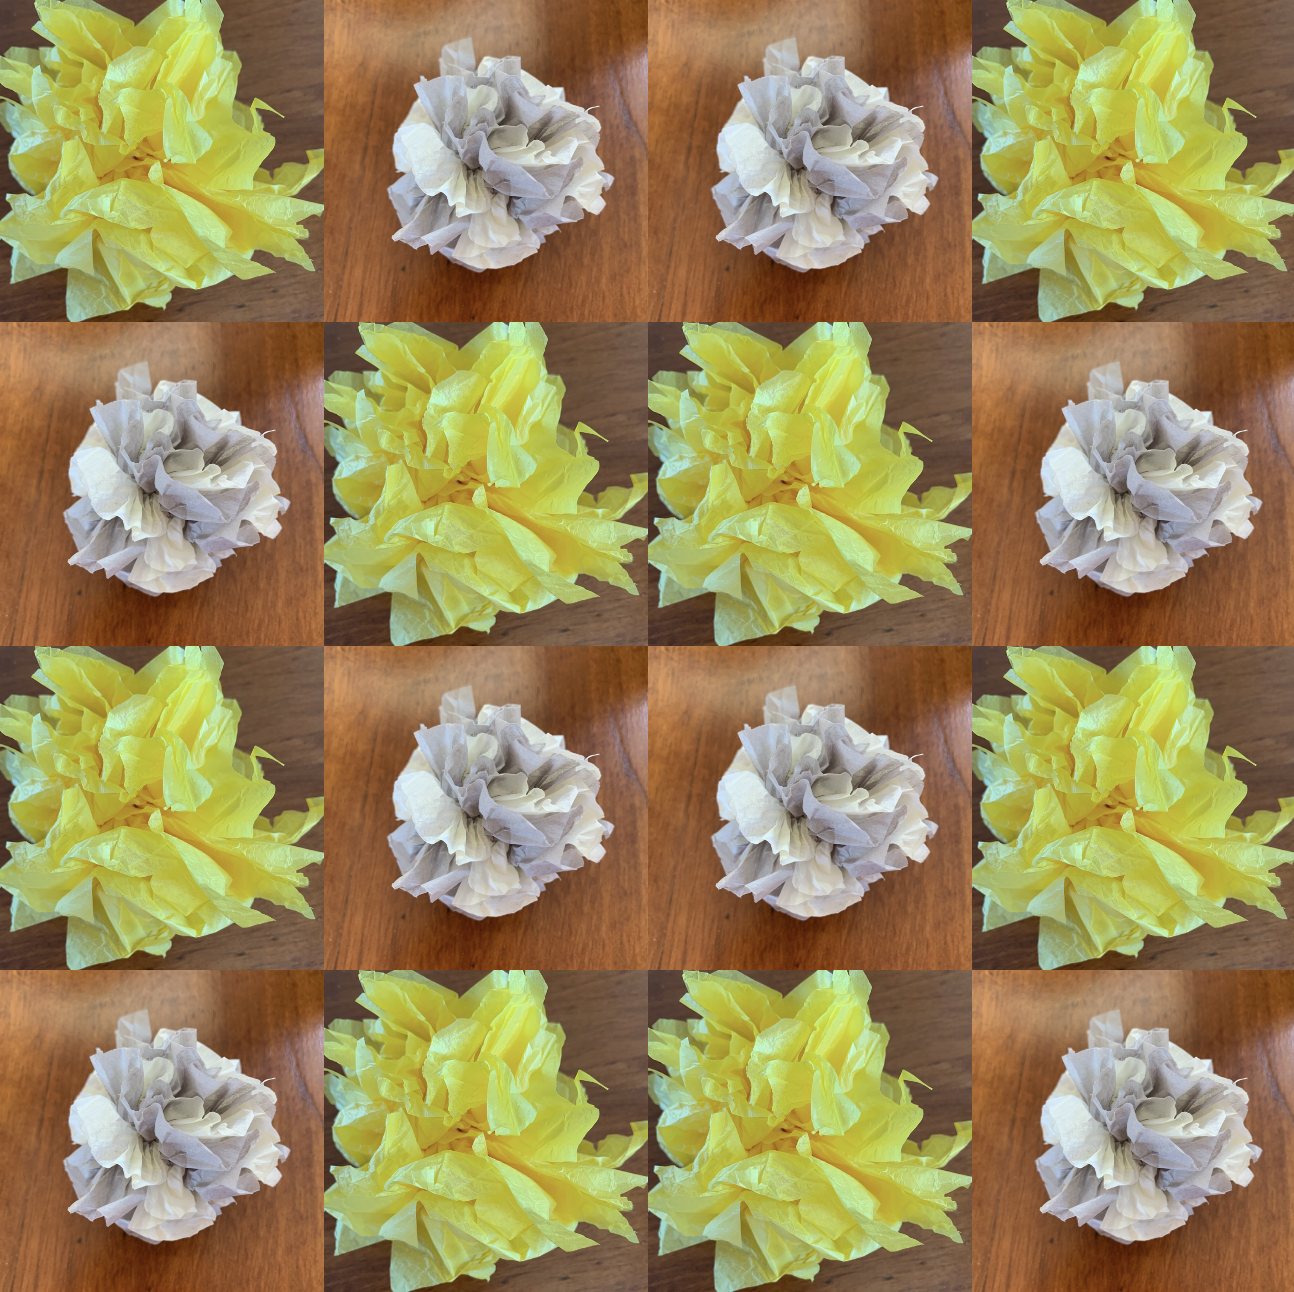 photographs of paper flowers.